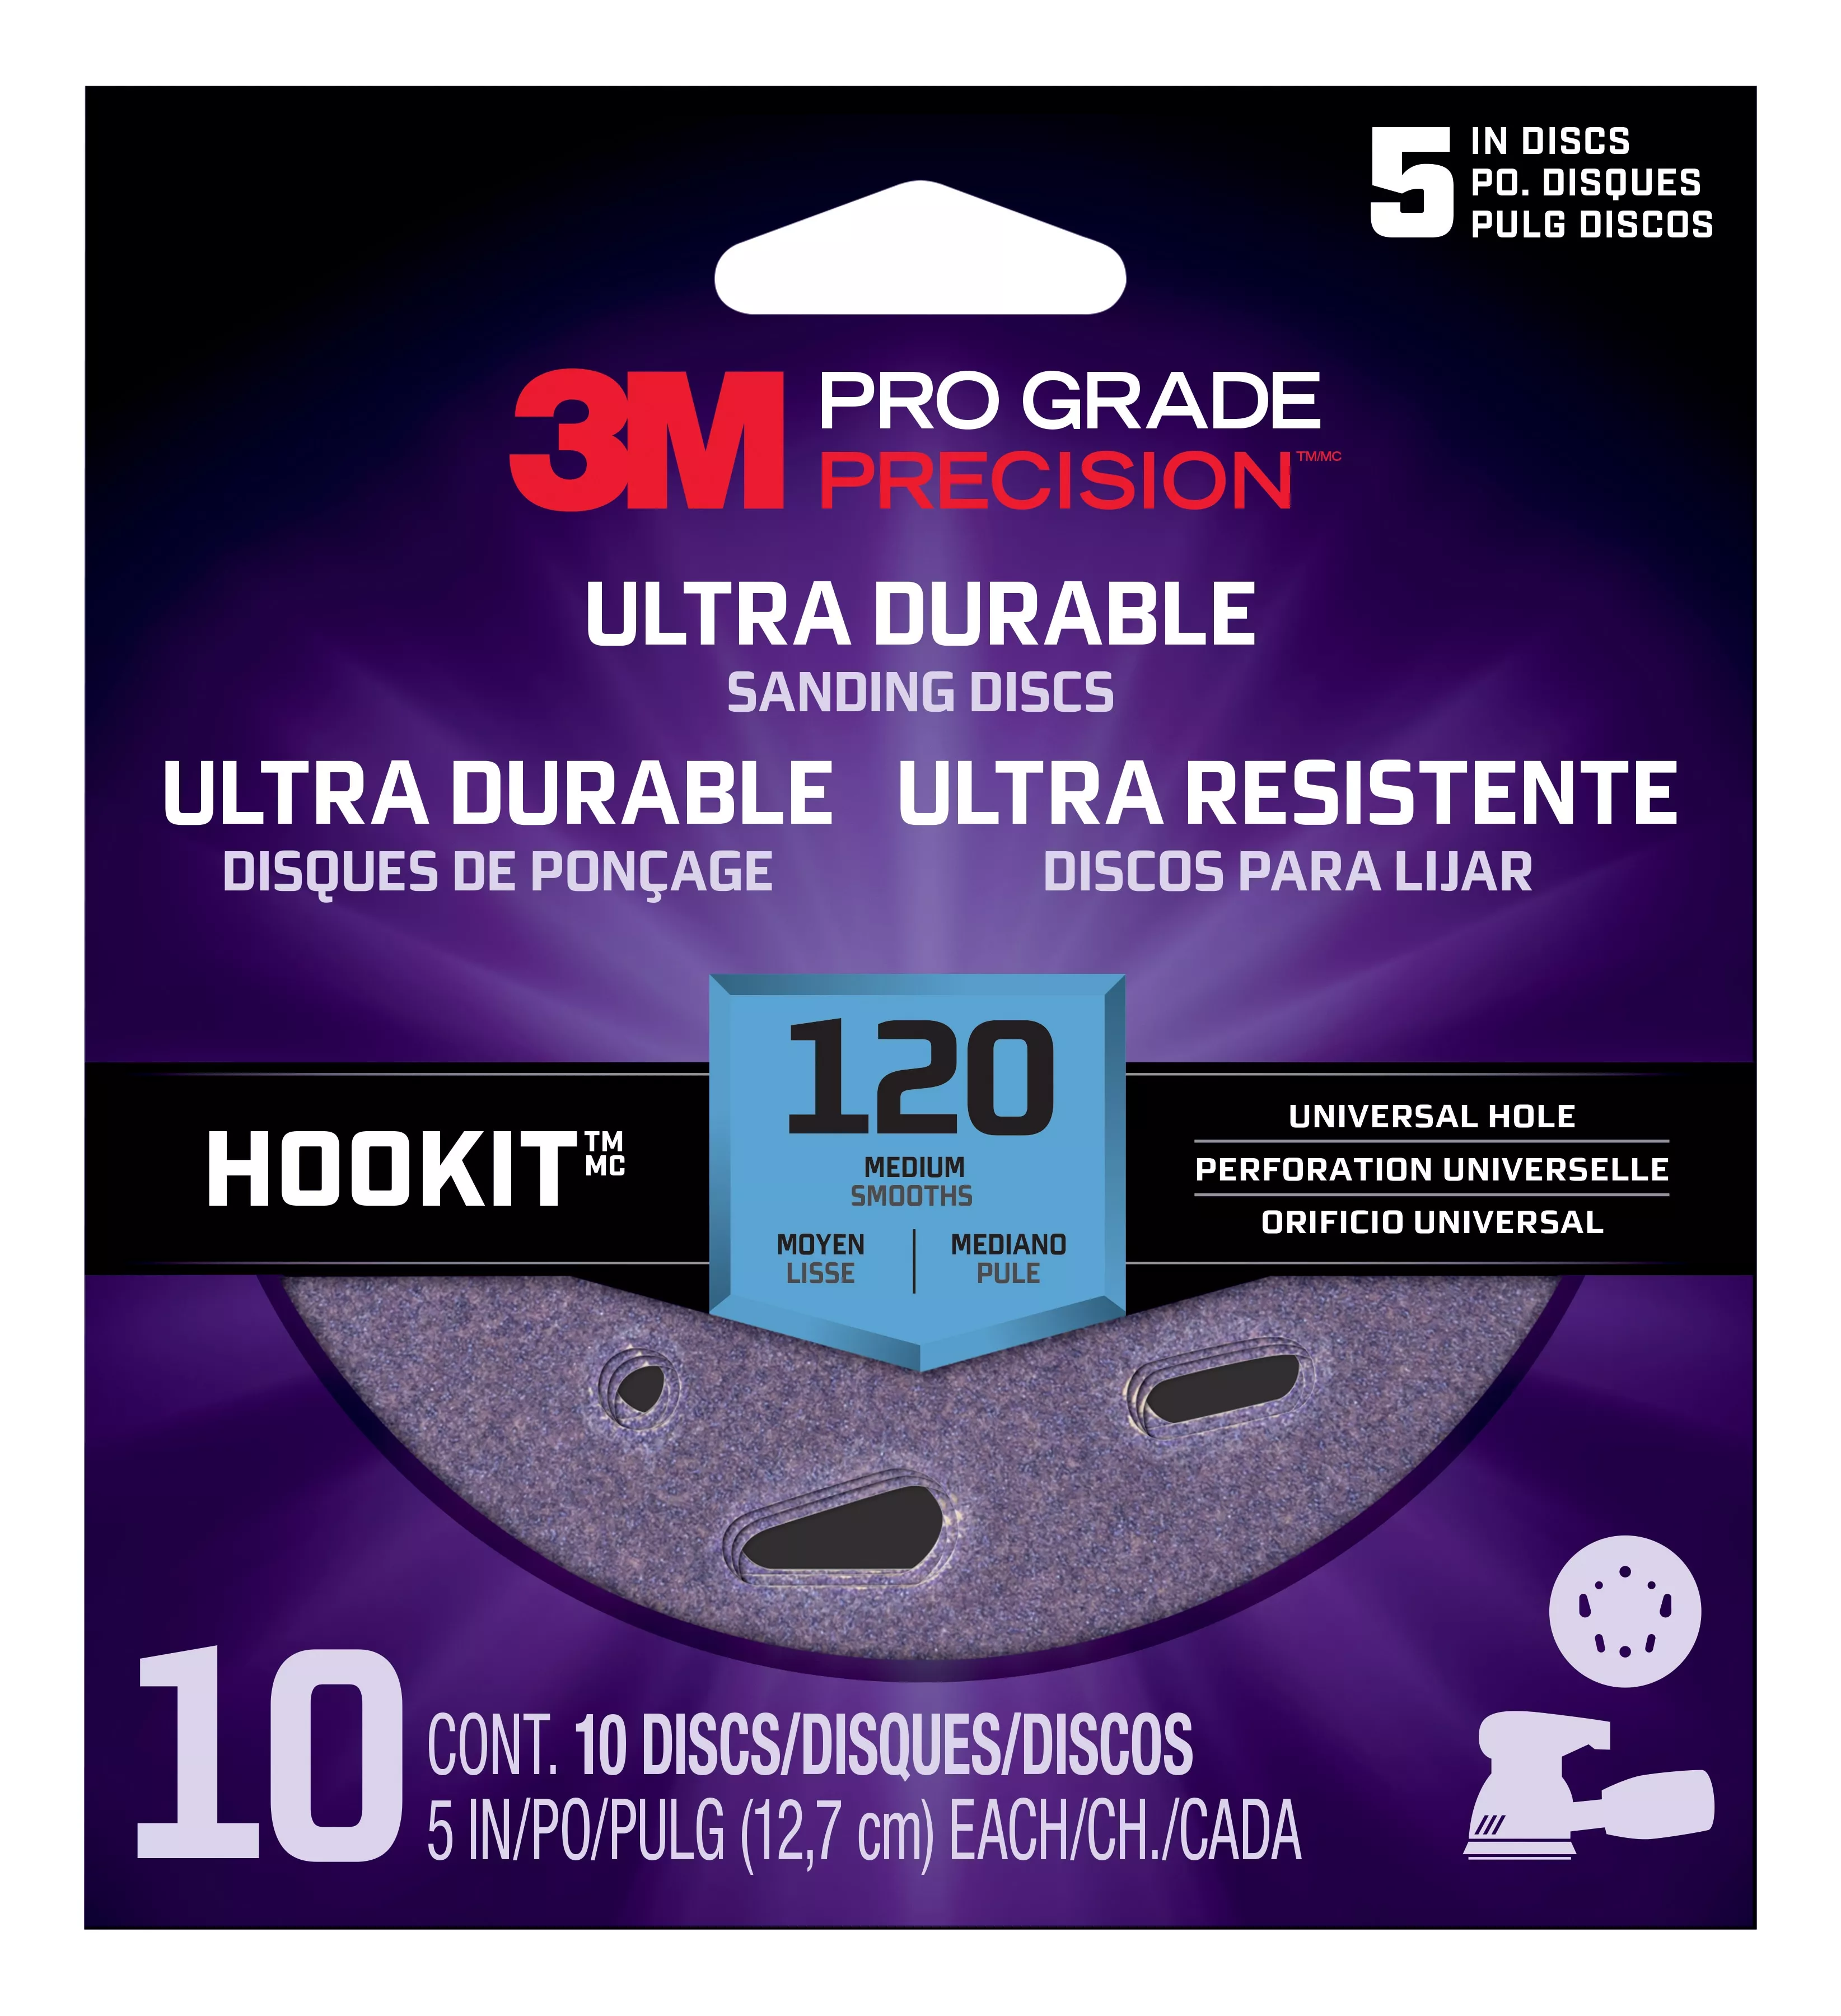 3M™ Pro Grade Precision™ Ultra Durable Universal Hole Sanding Disc,
DUH5120TRI-10T, 5 IN x UH, 120, 10 pack